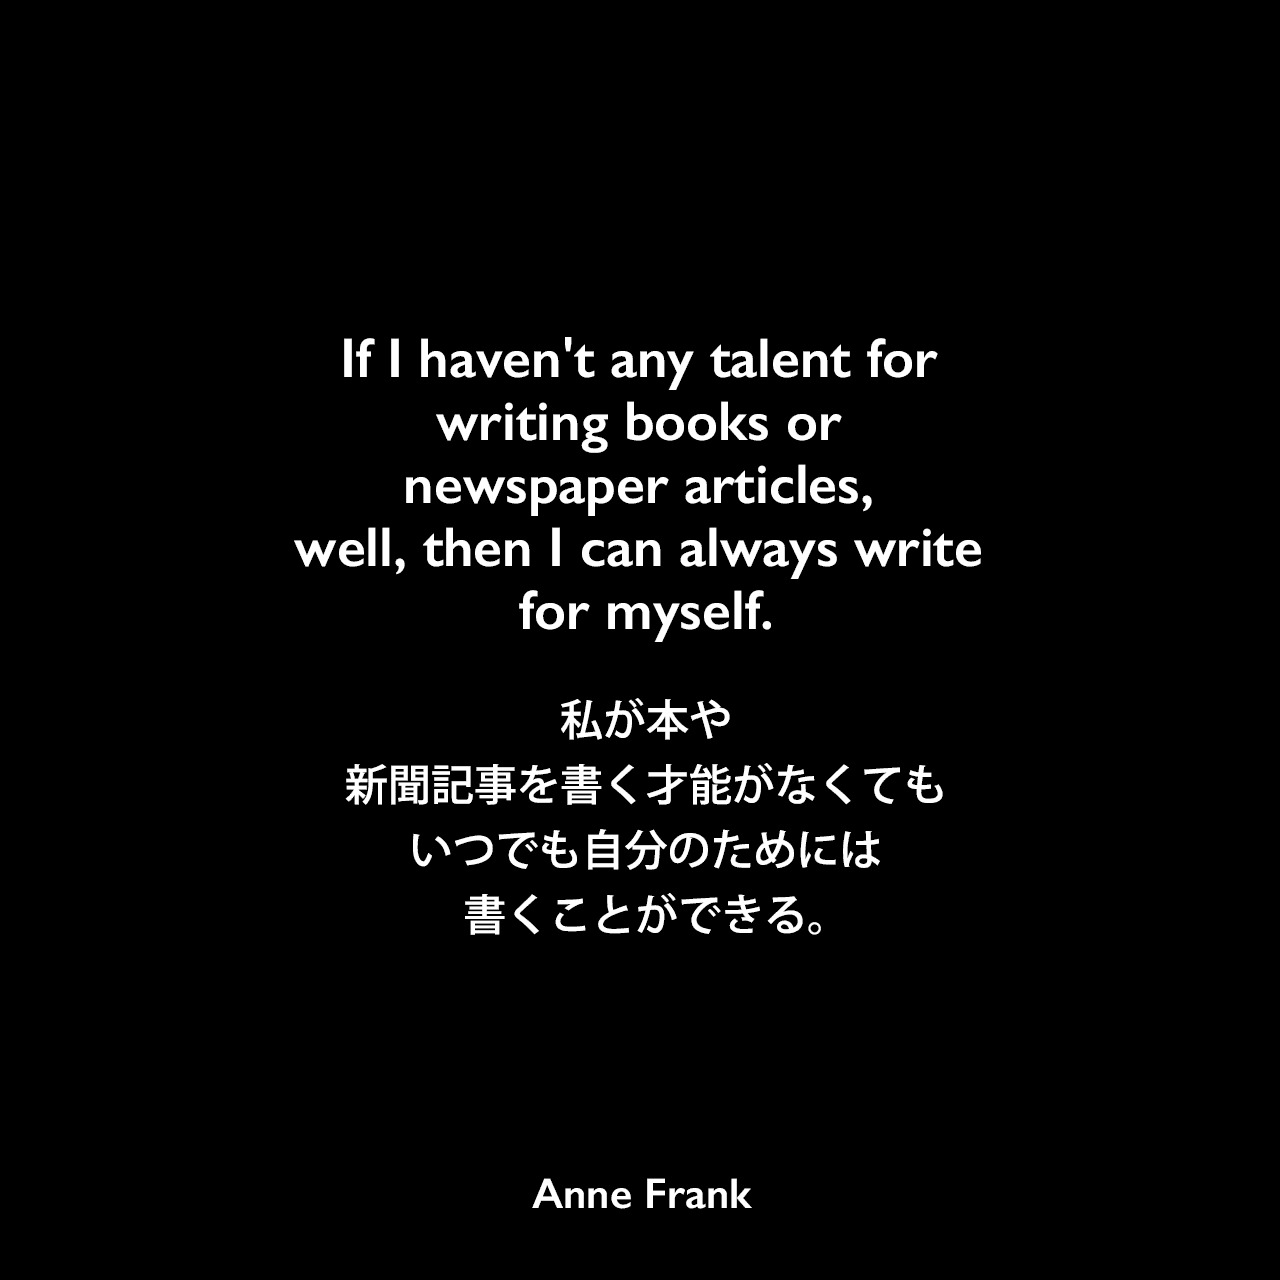 If I haven't any talent for writing books or newspaper articles, well, then I can always write for myself.私が本や新聞記事を書く才能がなくても、いつでも自分のためには書くことができる。Anne Frank